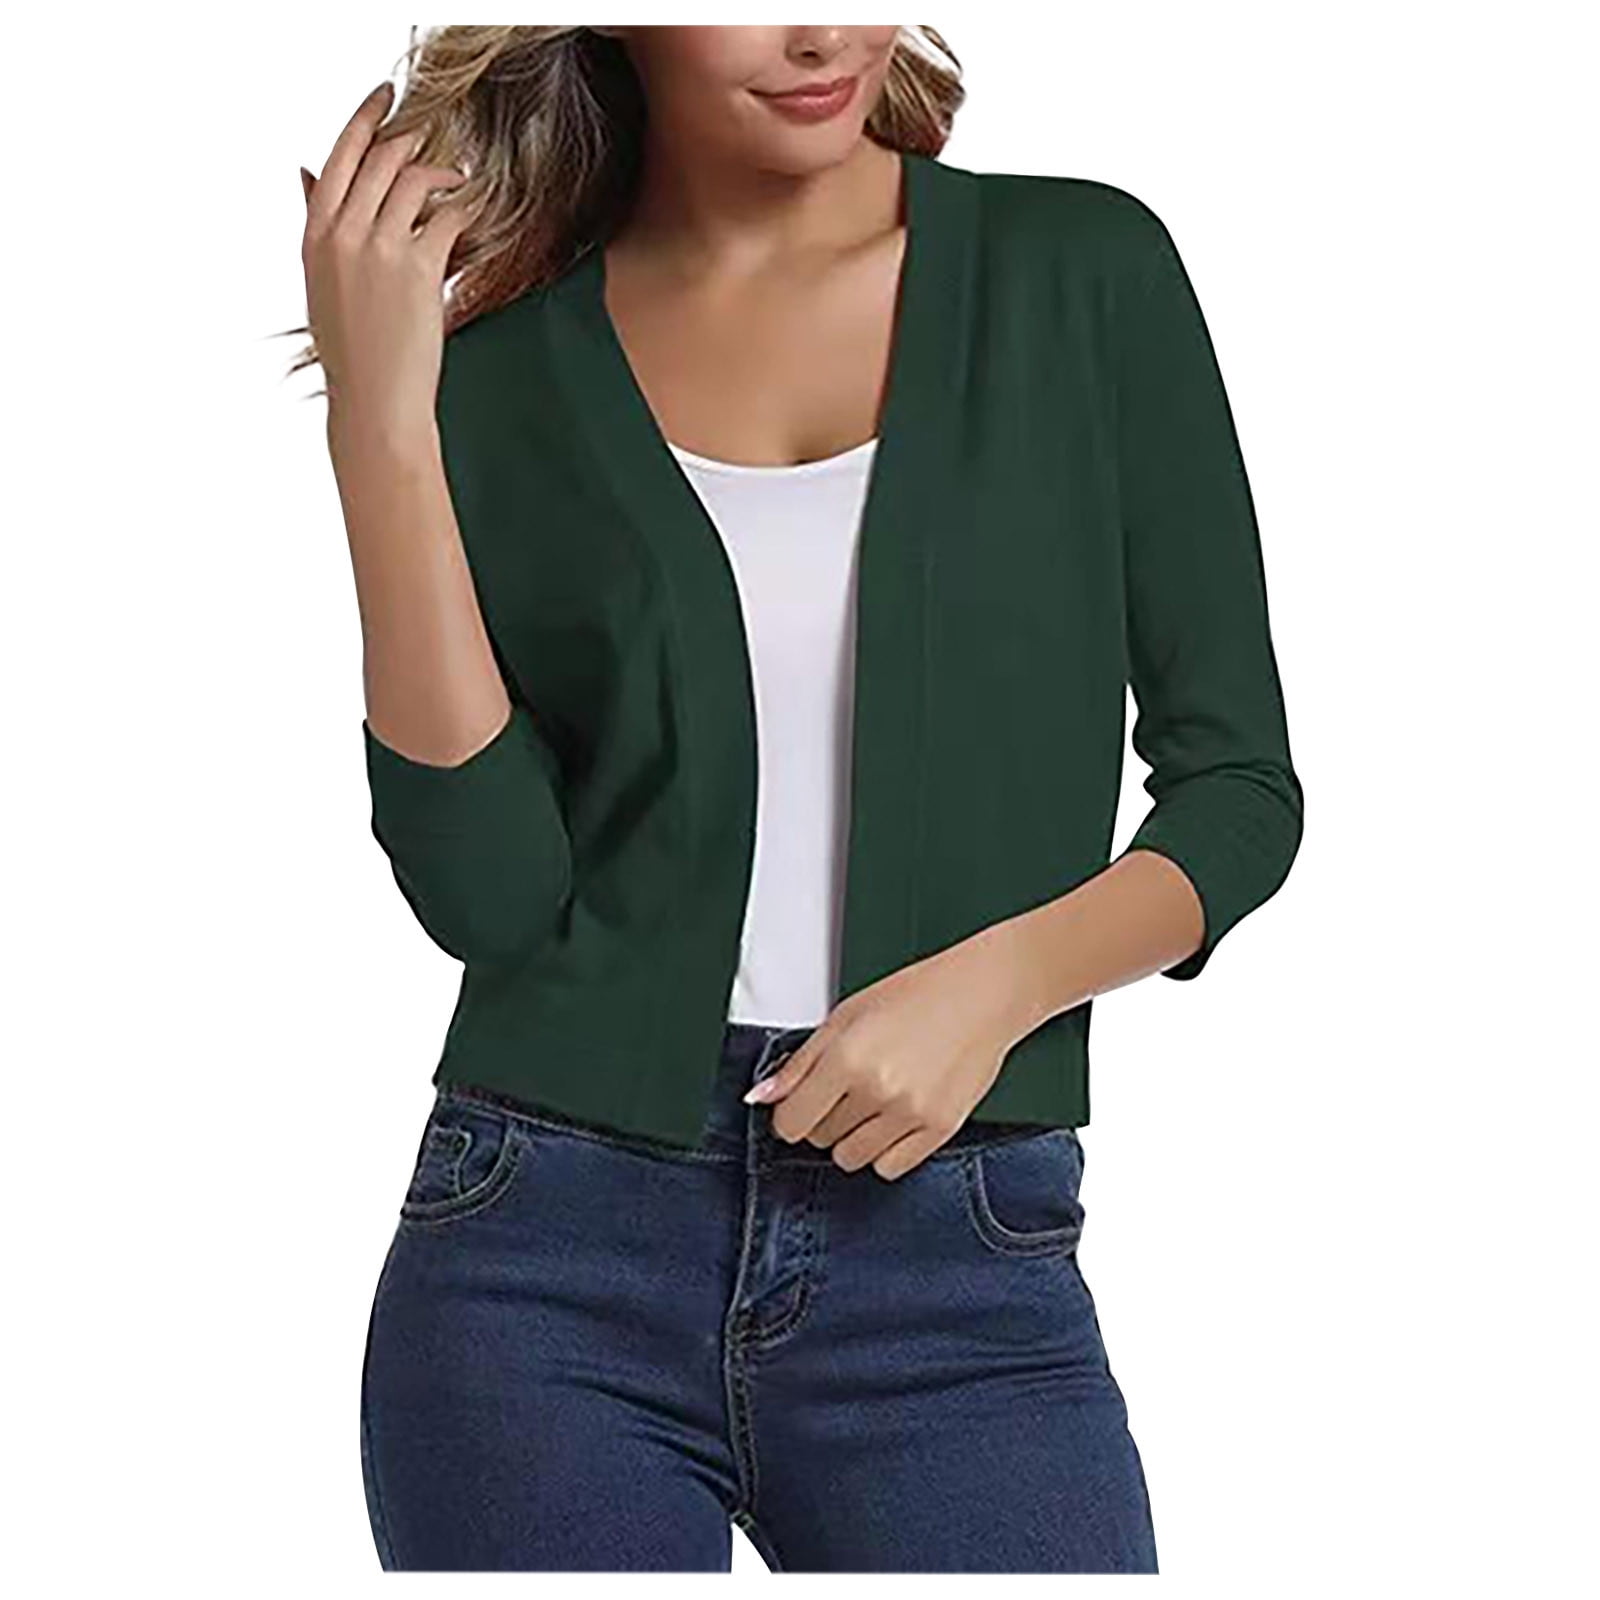 Dyegold Cropped Cardigans For Women 3/4 Sleeve Open Front Solid ...